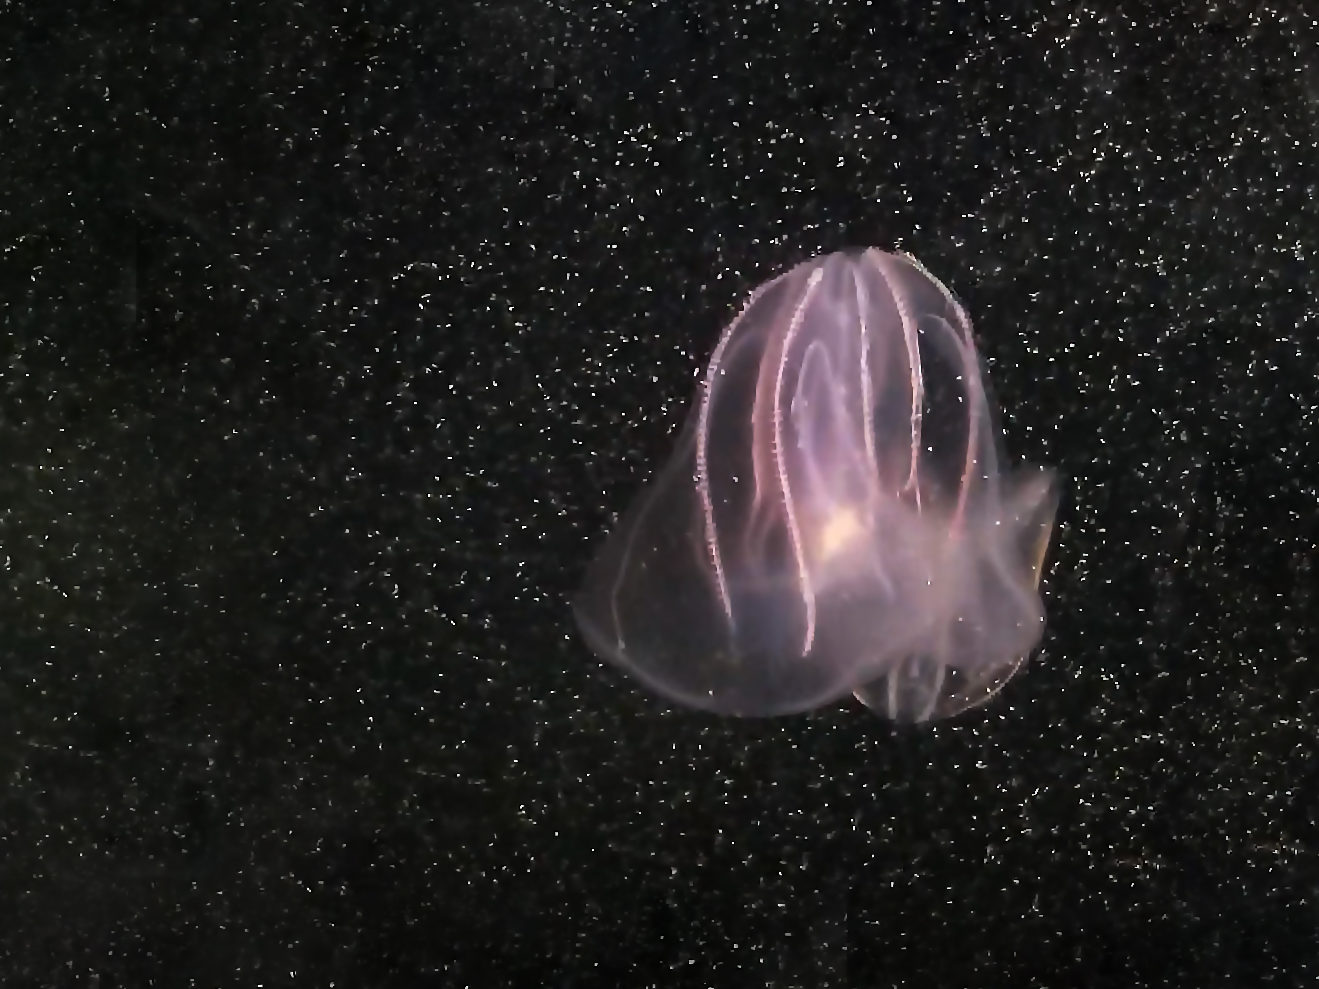 Comb-jellyfish-at-feeding-time